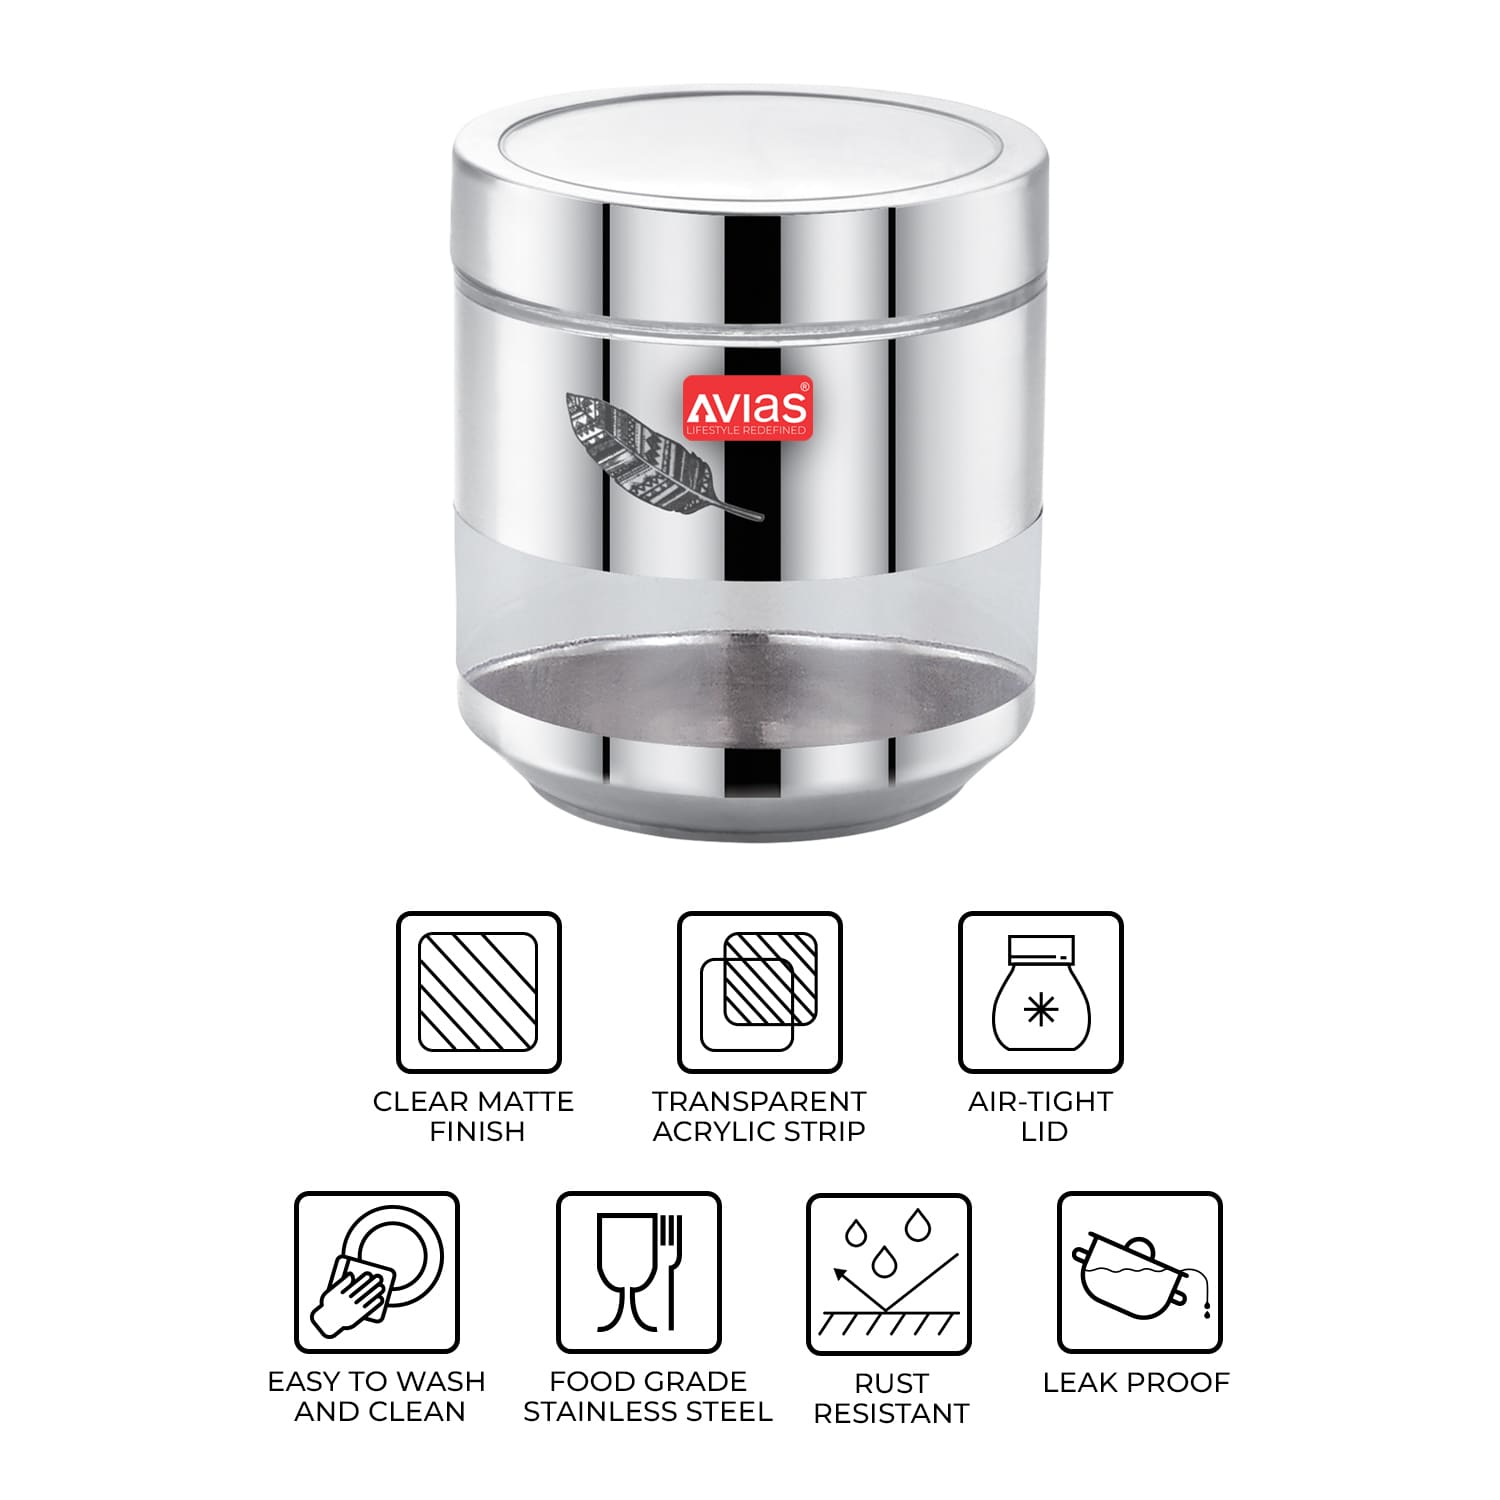 AVIAS Milano stainless steel Canister - features